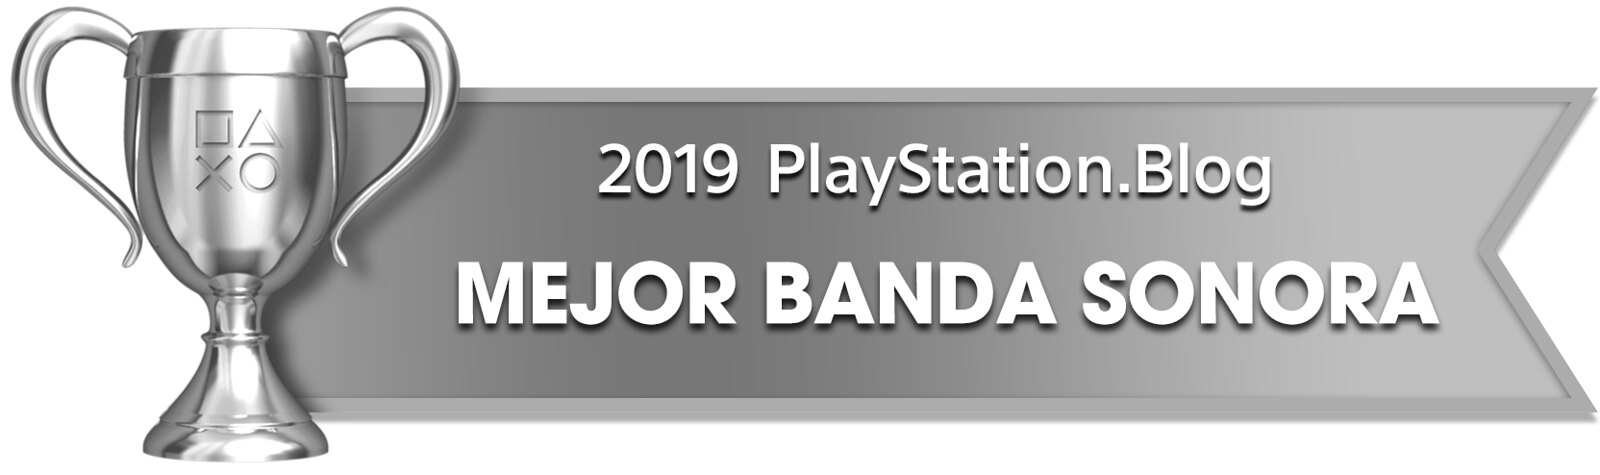 PS Blog Game of the Year 2019 - Best Soundtrack - 3 - Silver